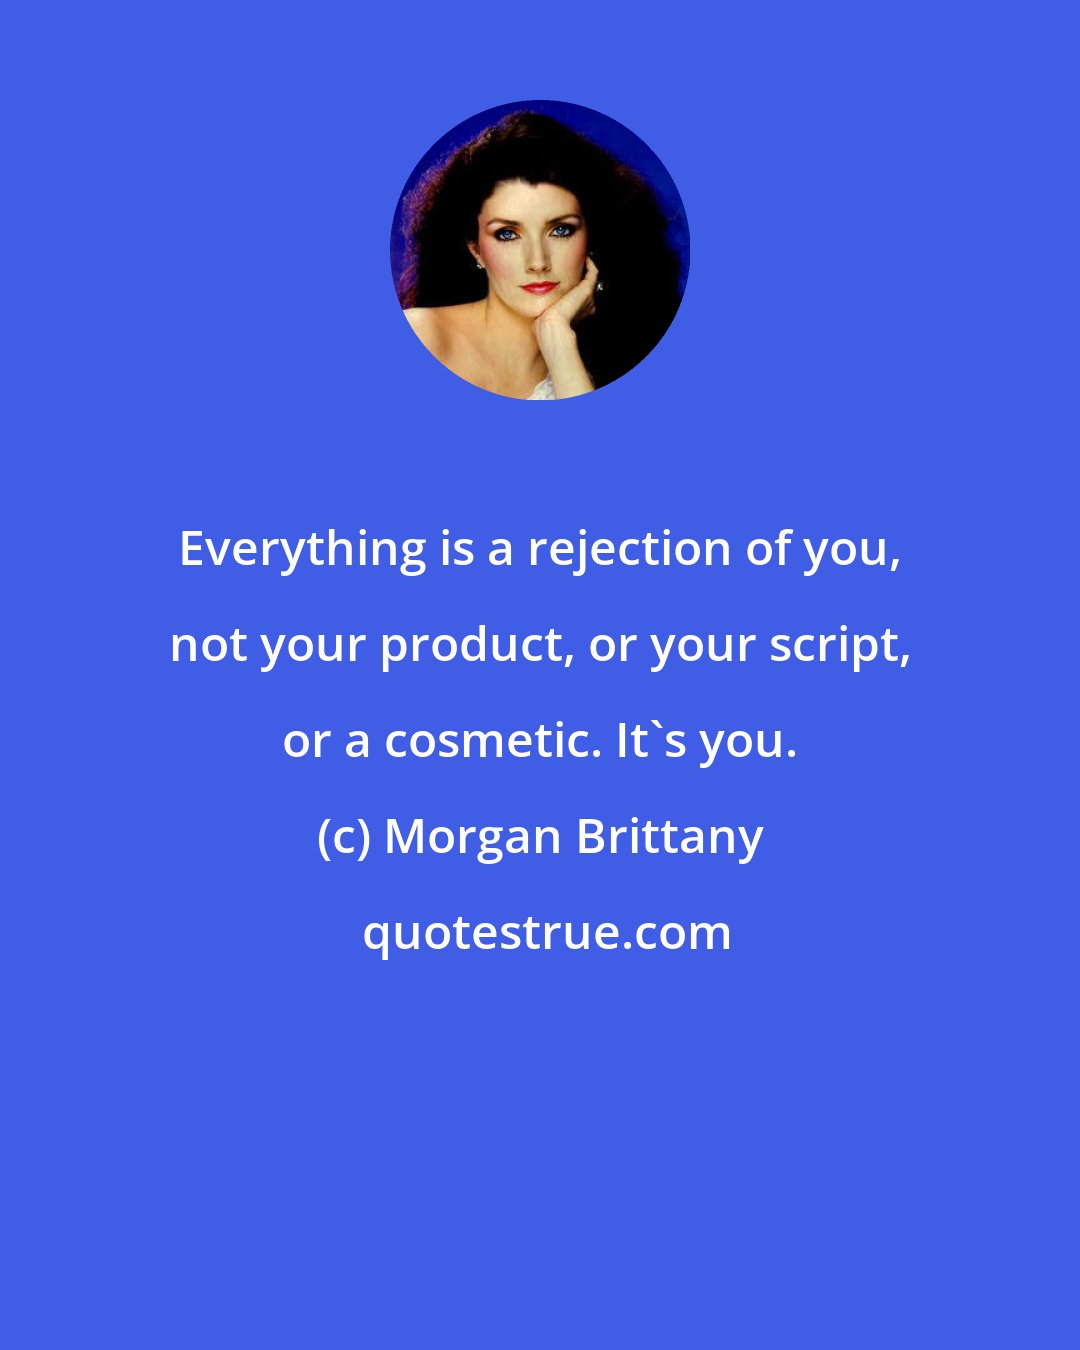 Morgan Brittany: Everything is a rejection of you, not your product, or your script, or a cosmetic. It's you.